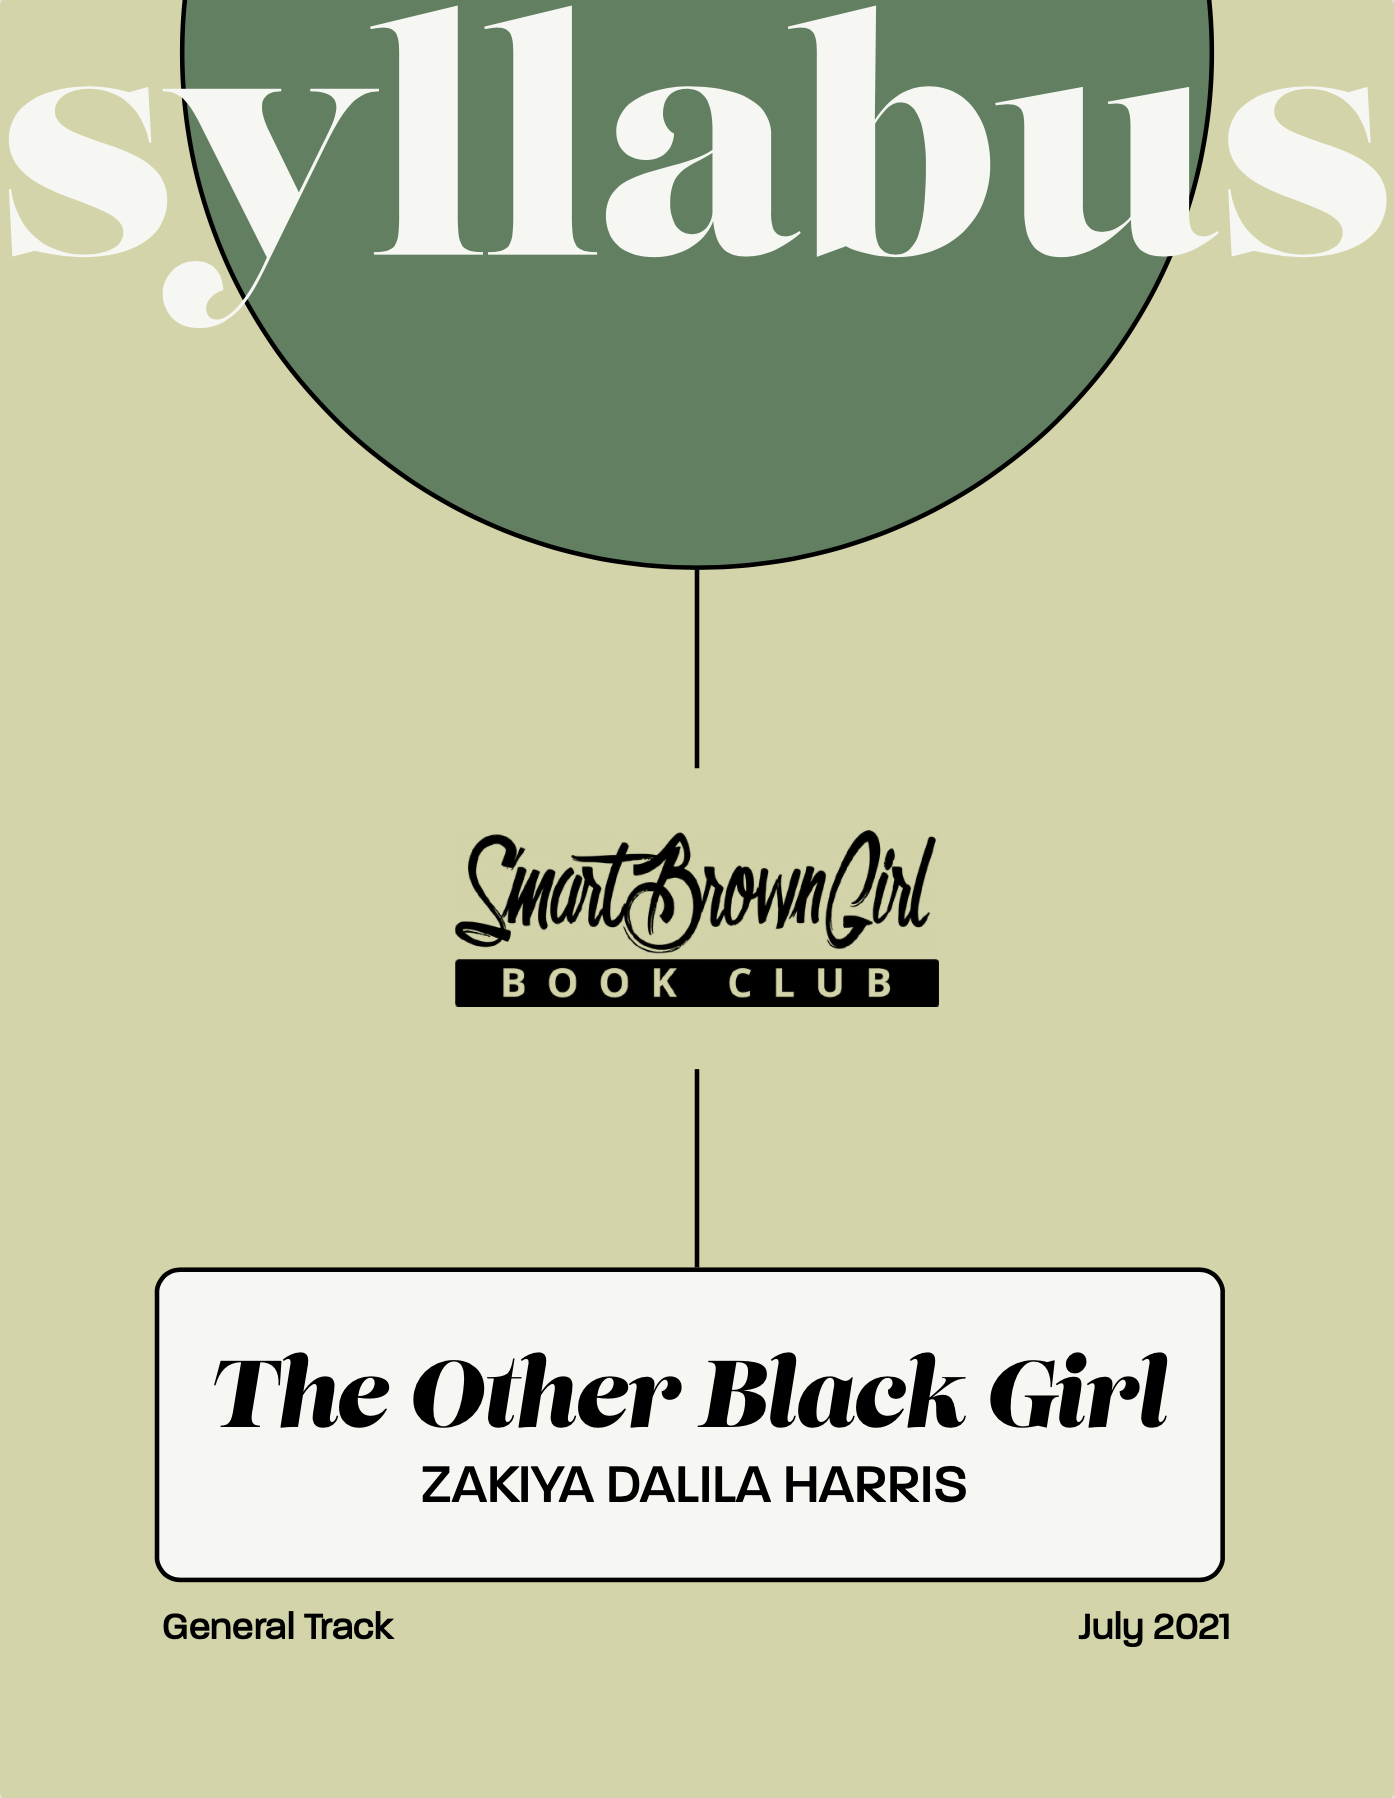 July 21 General Track Syllabus - The Other Black Girl